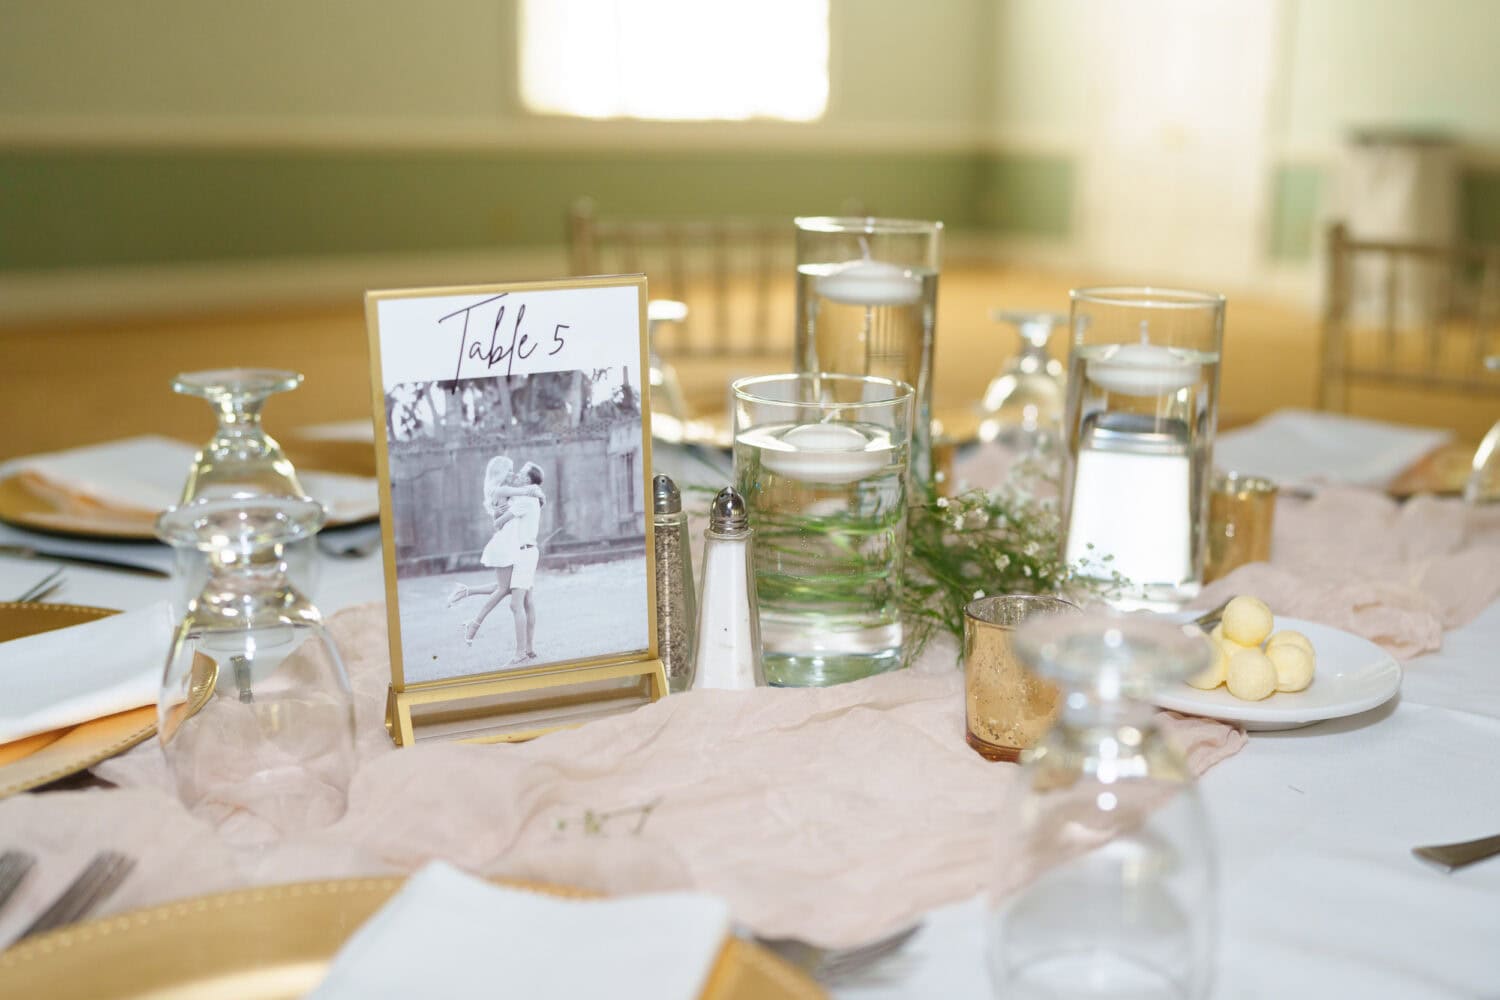 My engagement pictures decorating the tables - Pawleys Plantation